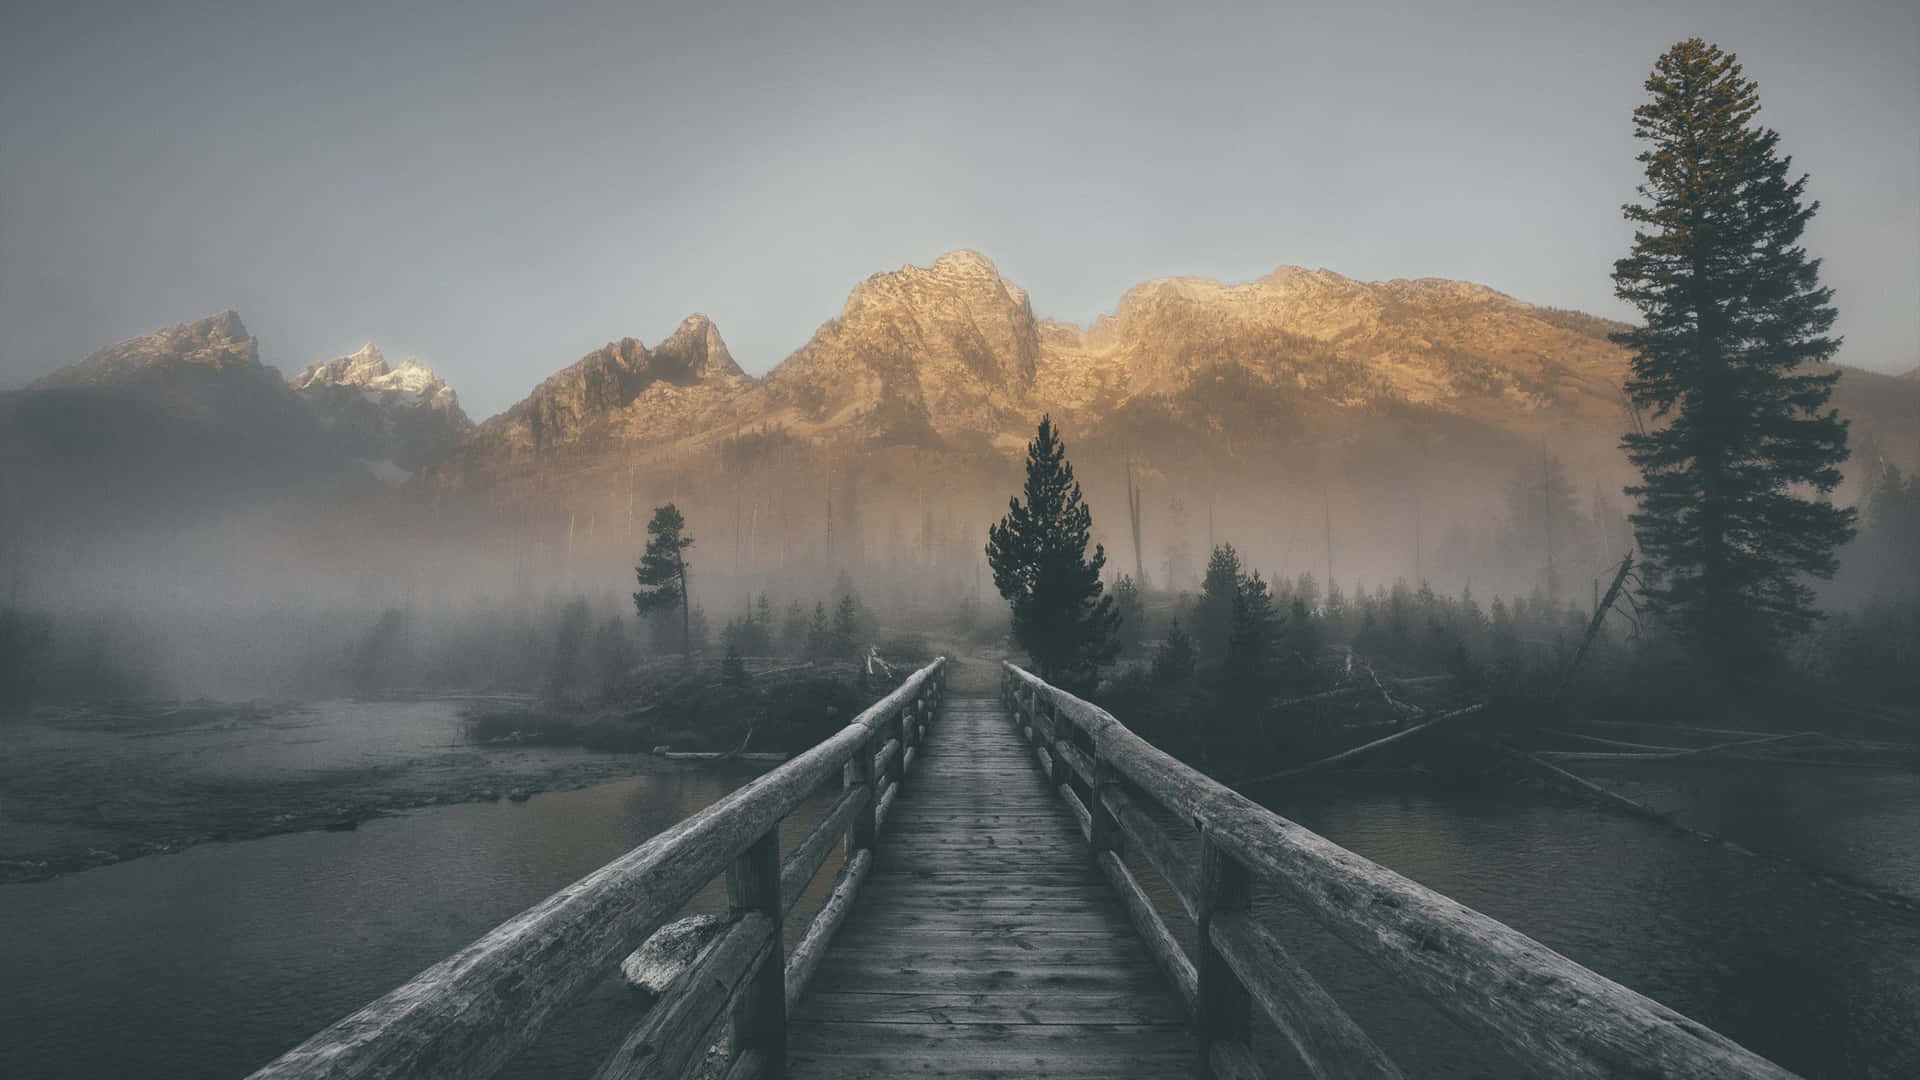 A Wooden Bridge Over A River In The Mountains Wallpaper